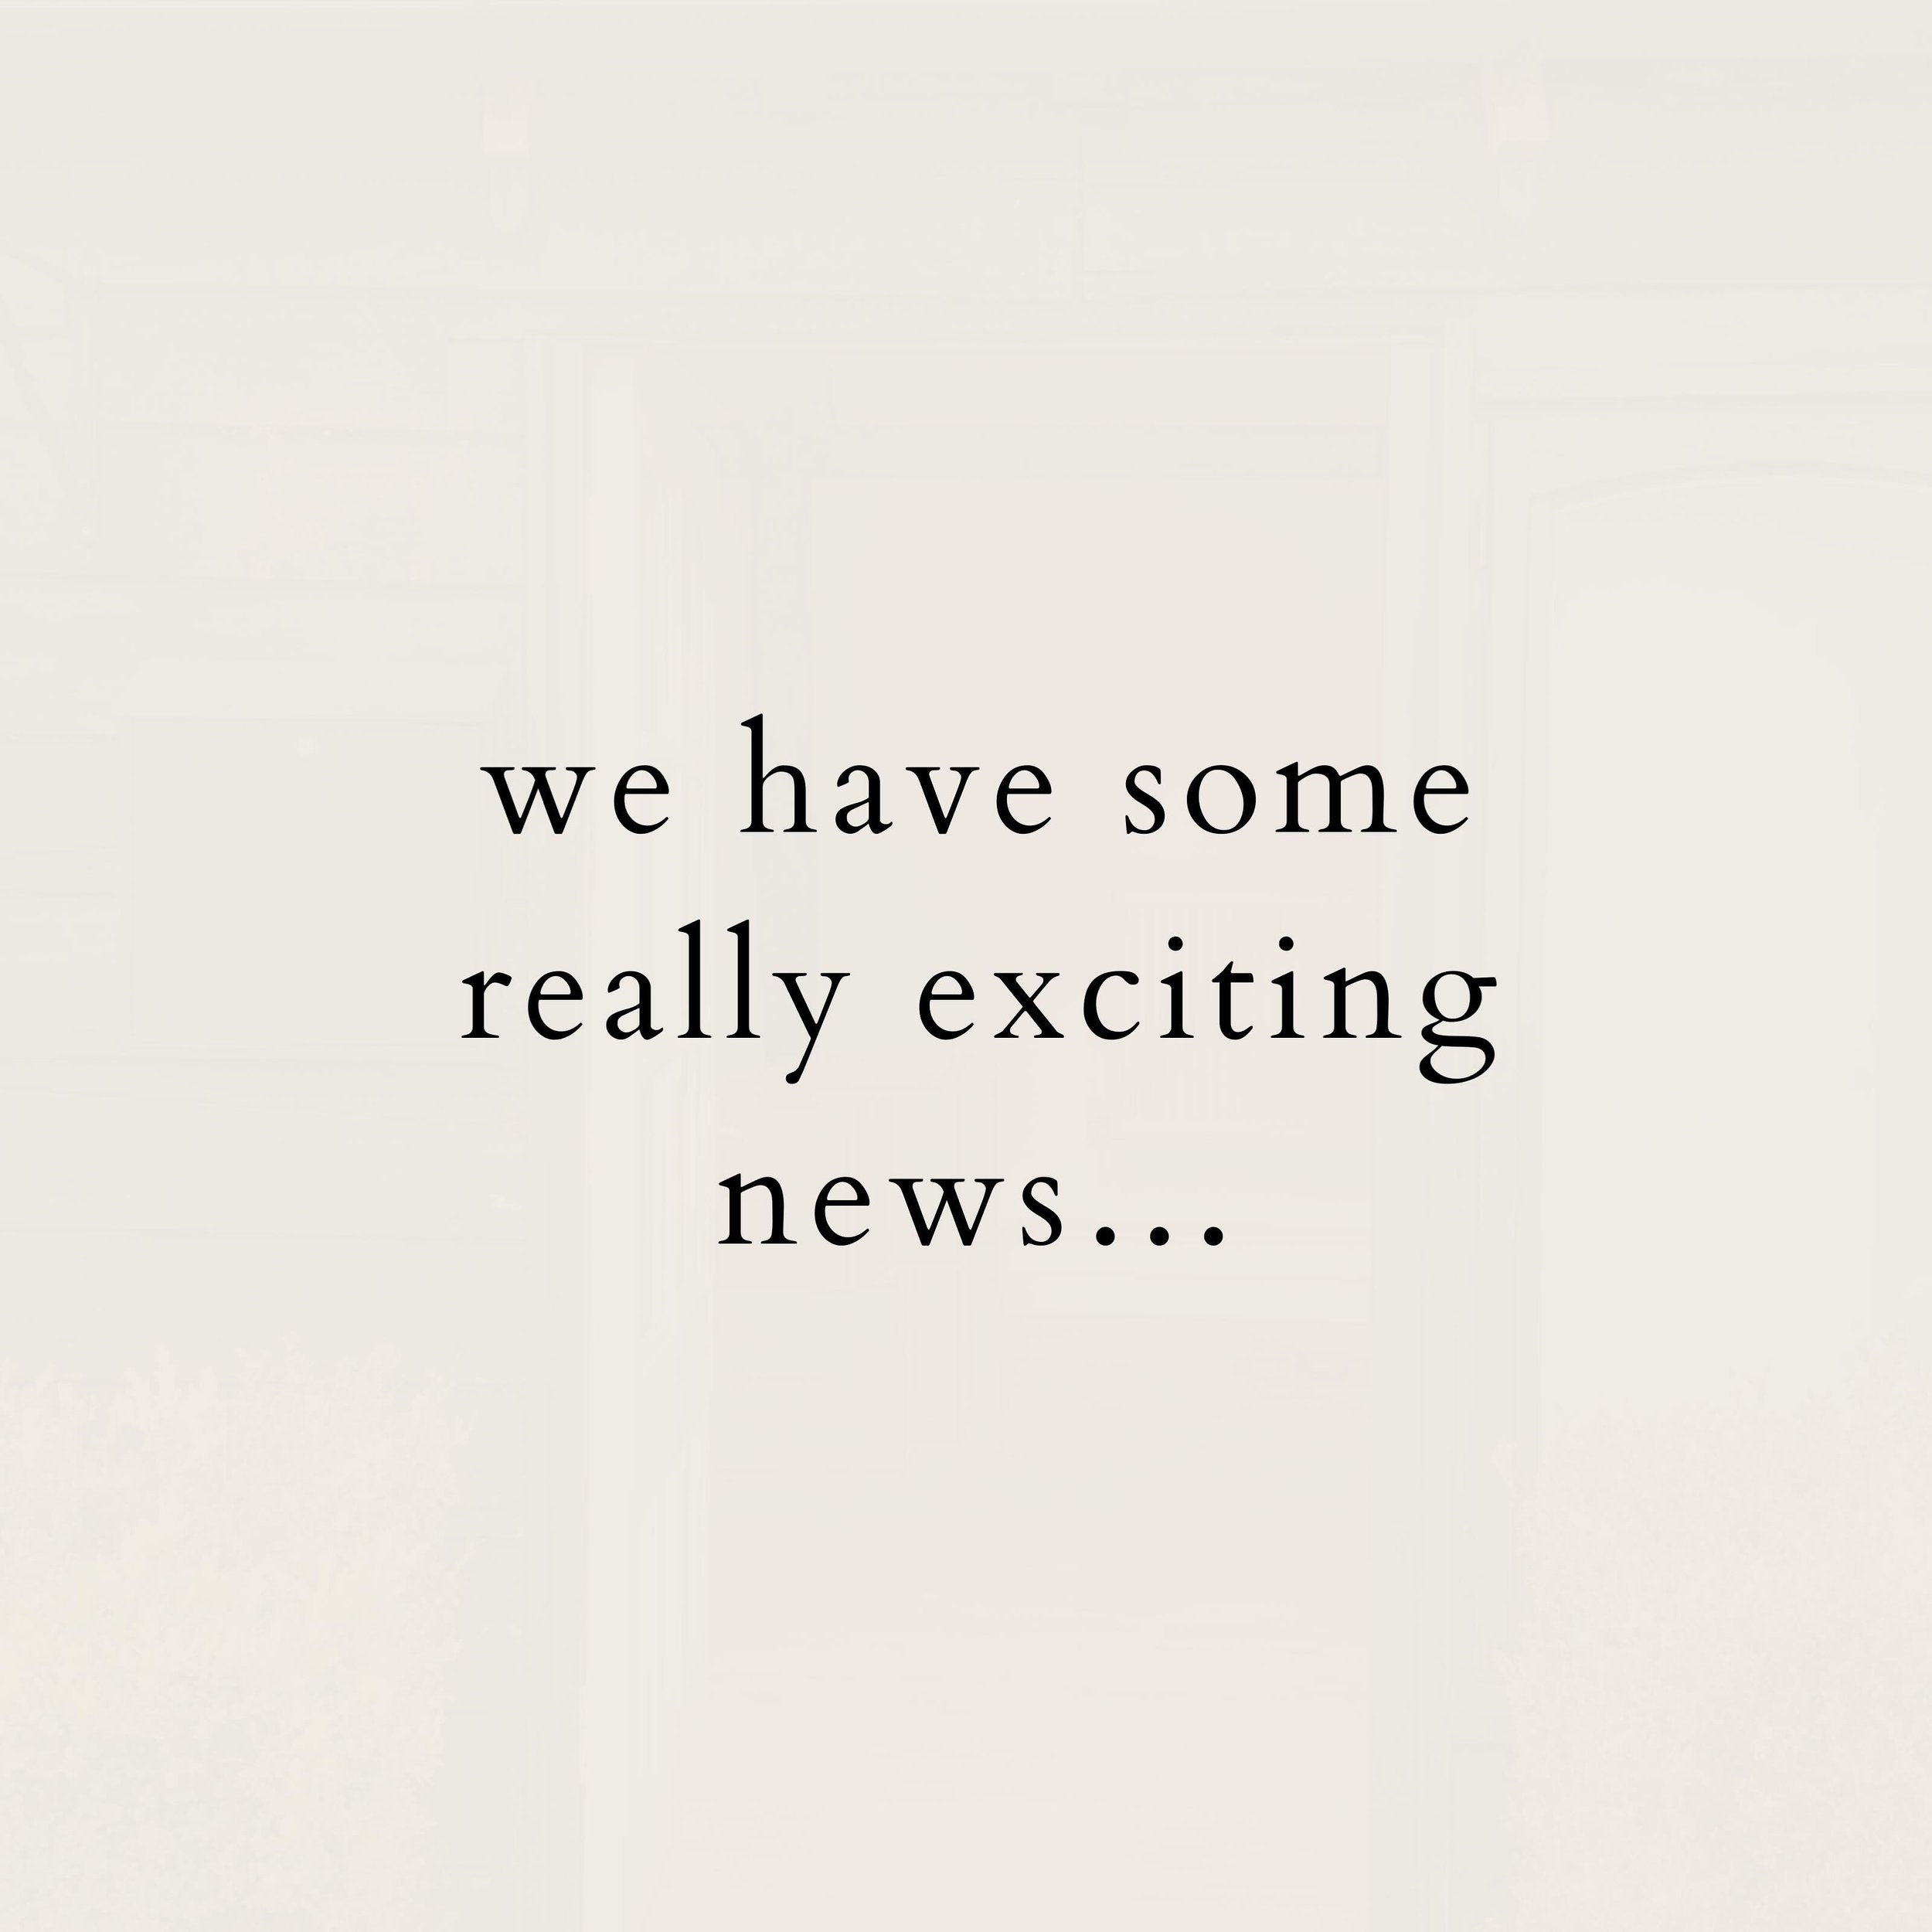 We have some HUGE news to share with you all soon! We&rsquo;re really excited to share more 🥰 any guesses what it could be? 👇🏼